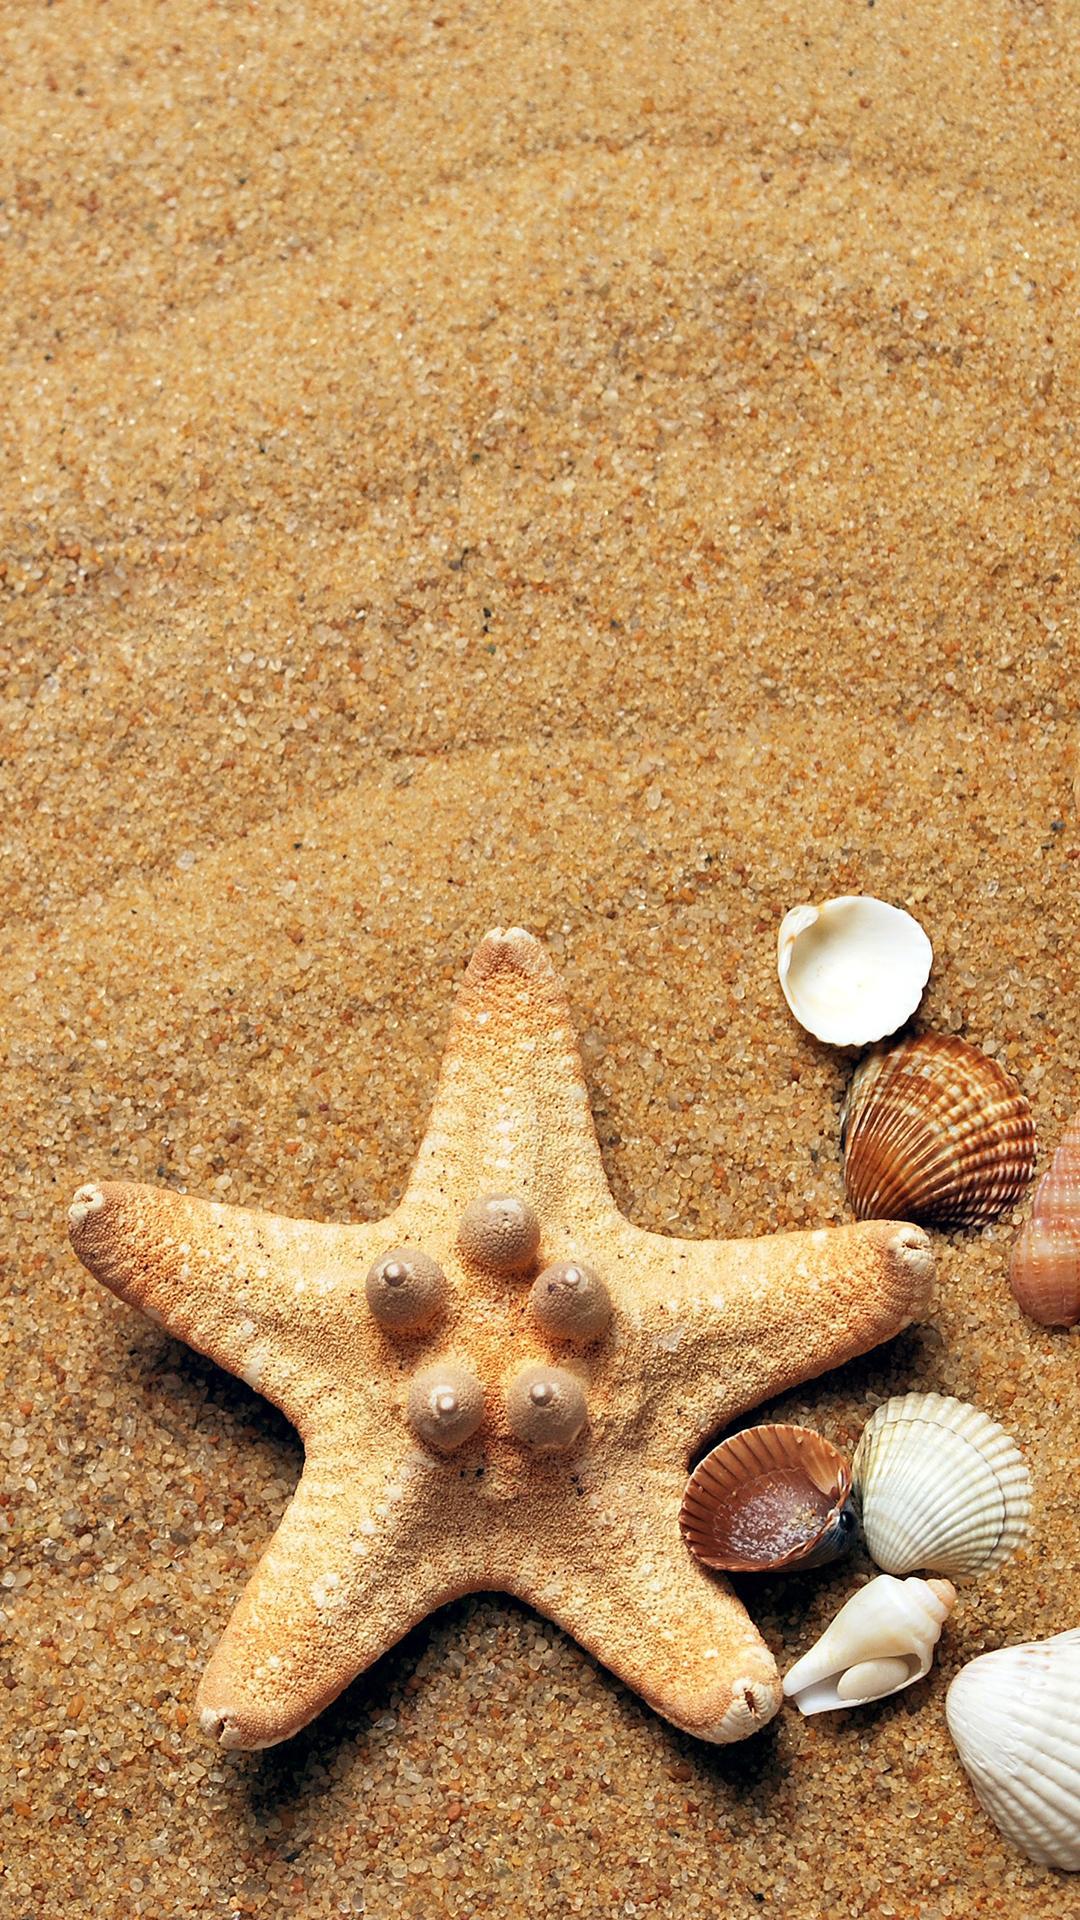 Sea Shells HD Wallpaper For Your Huawei Honor 8 Smartphone